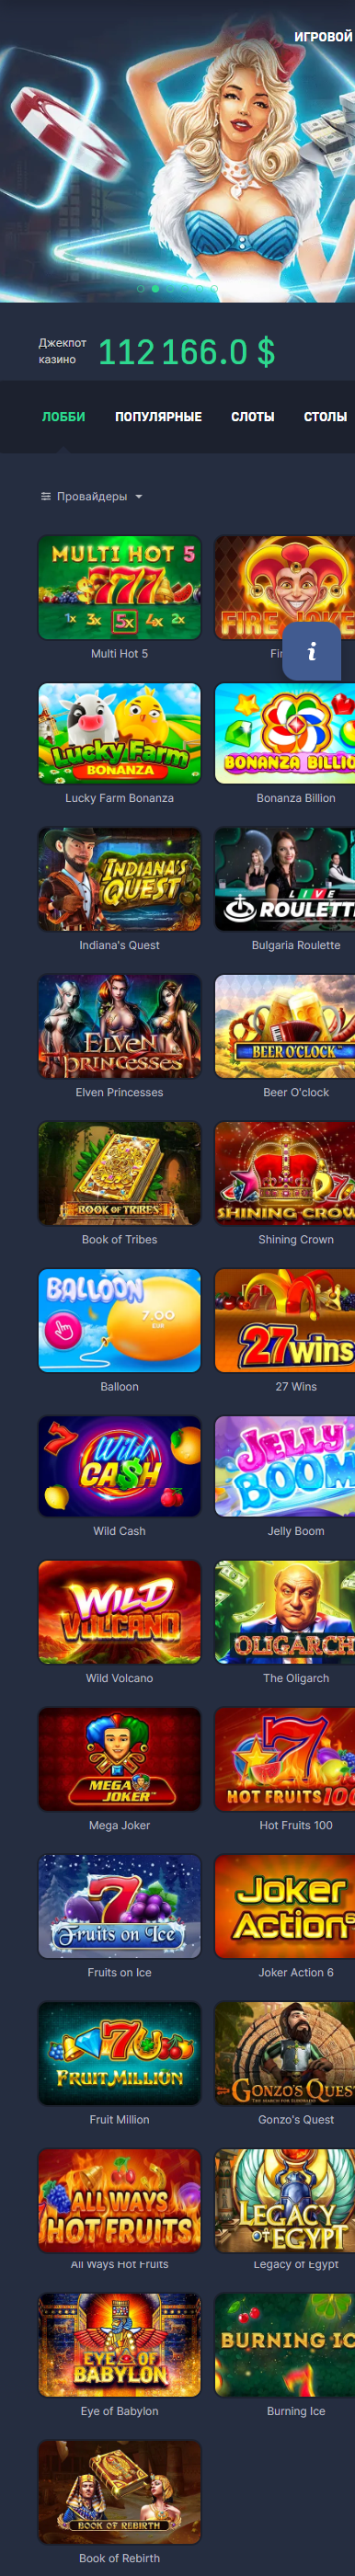 Responsible Gambling Practices in Turkish Online Gambling Scene - Relax, It's Play Time!